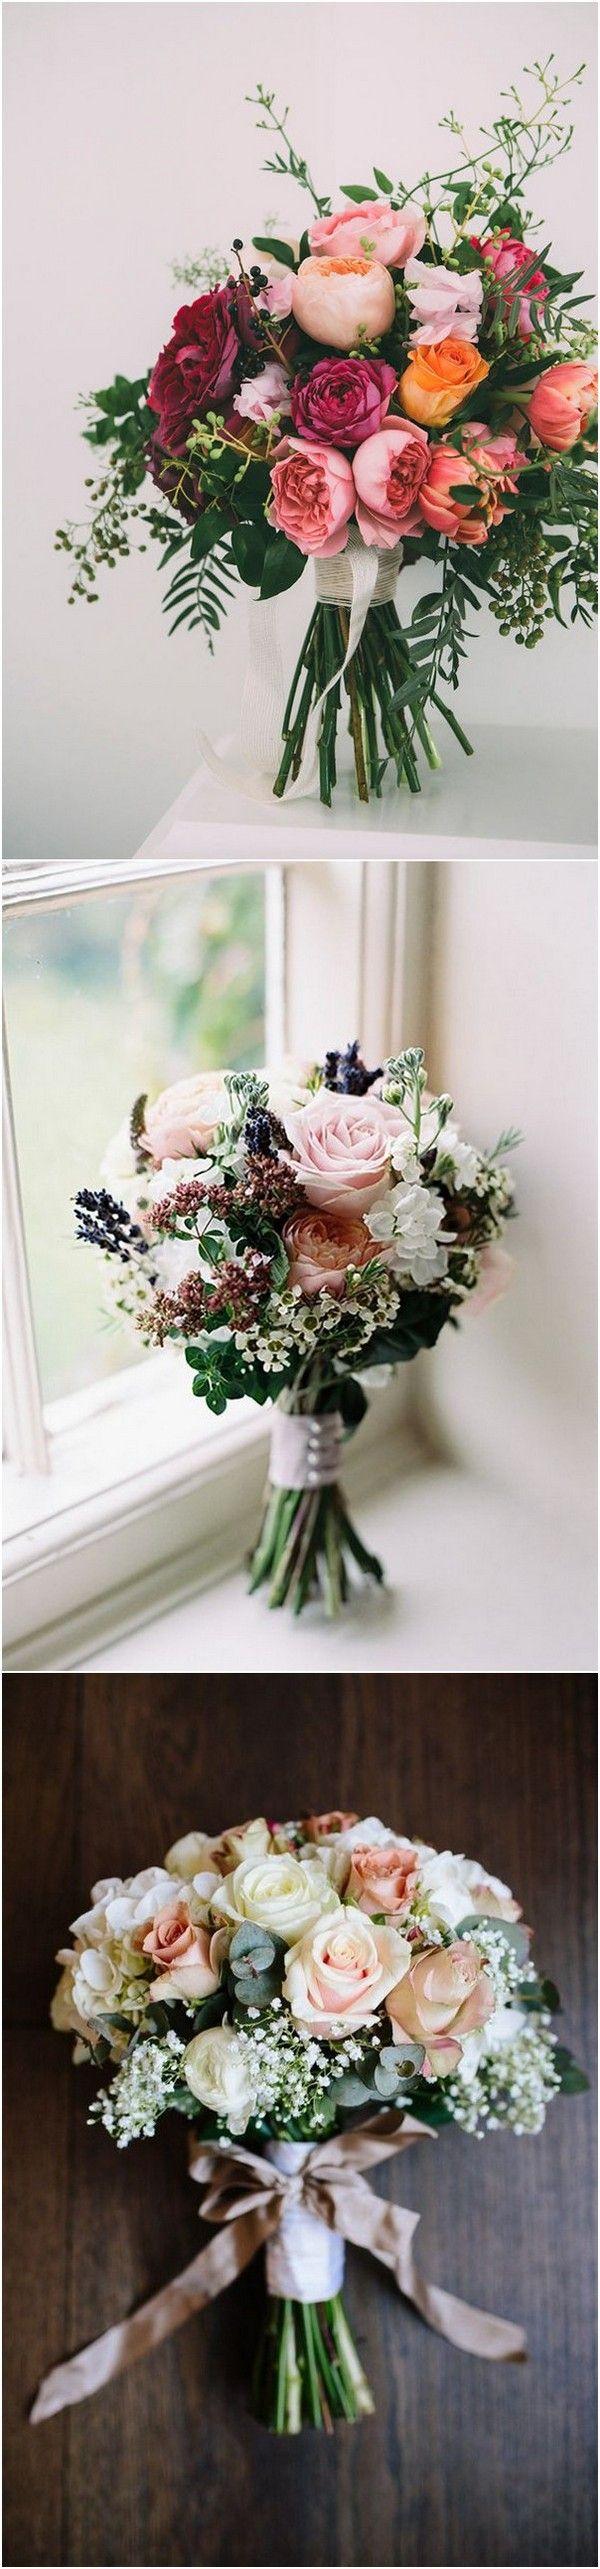 Wedding - 15 Stunning Wedding Bouquets For 2018 - Page 2 Of 2